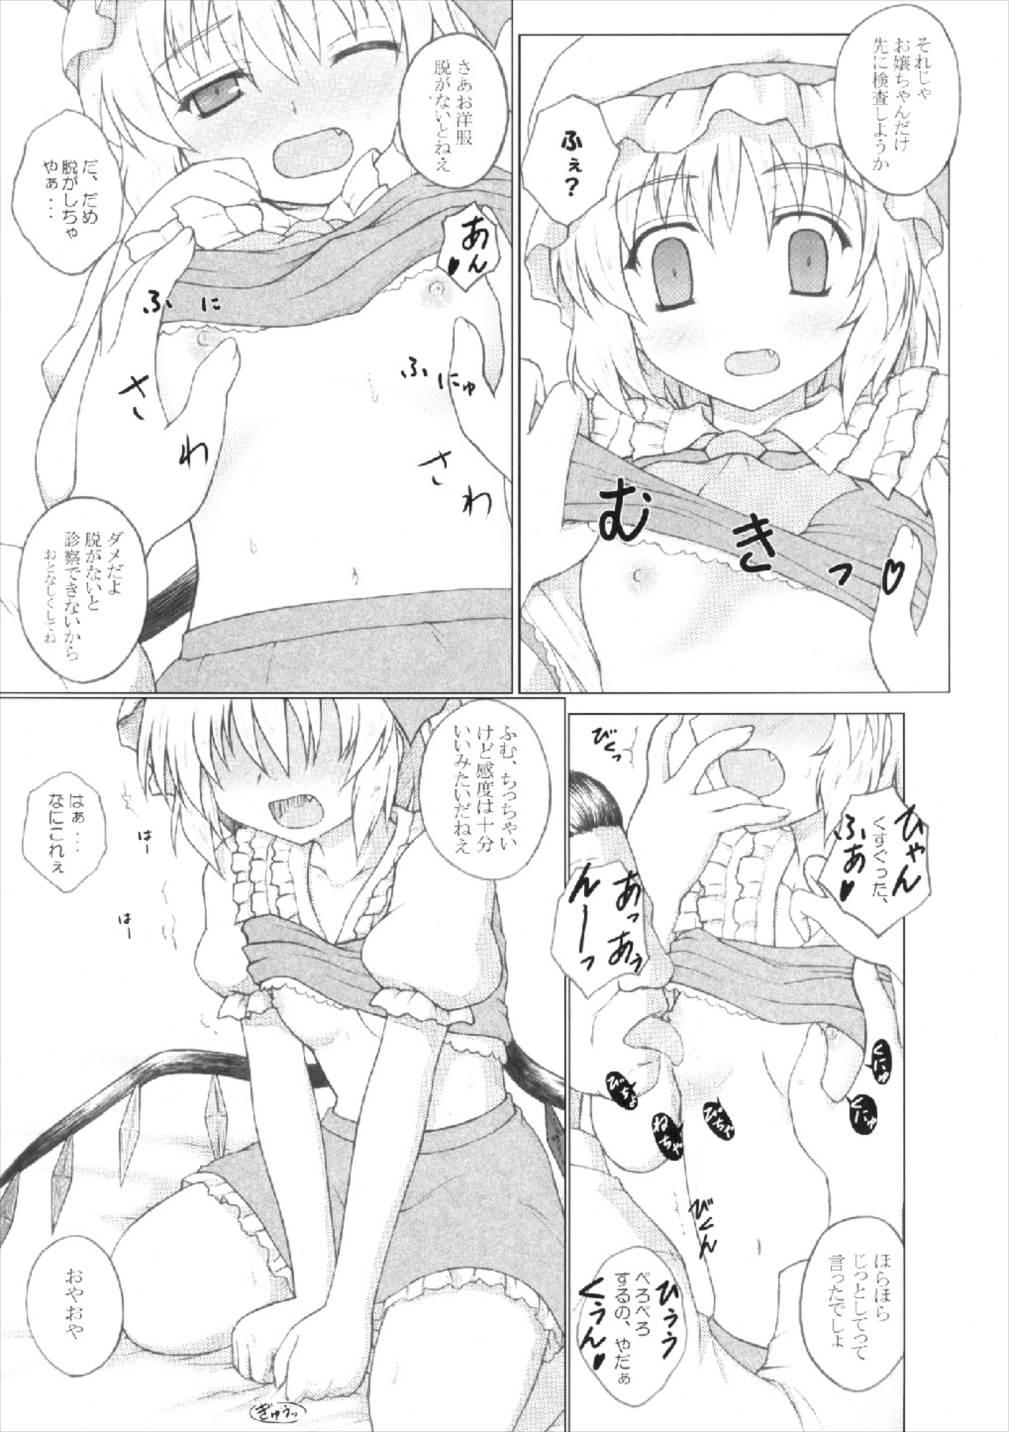 Butthole DOUBLE ACTION!! - Touhou project Ladyboy - Page 8